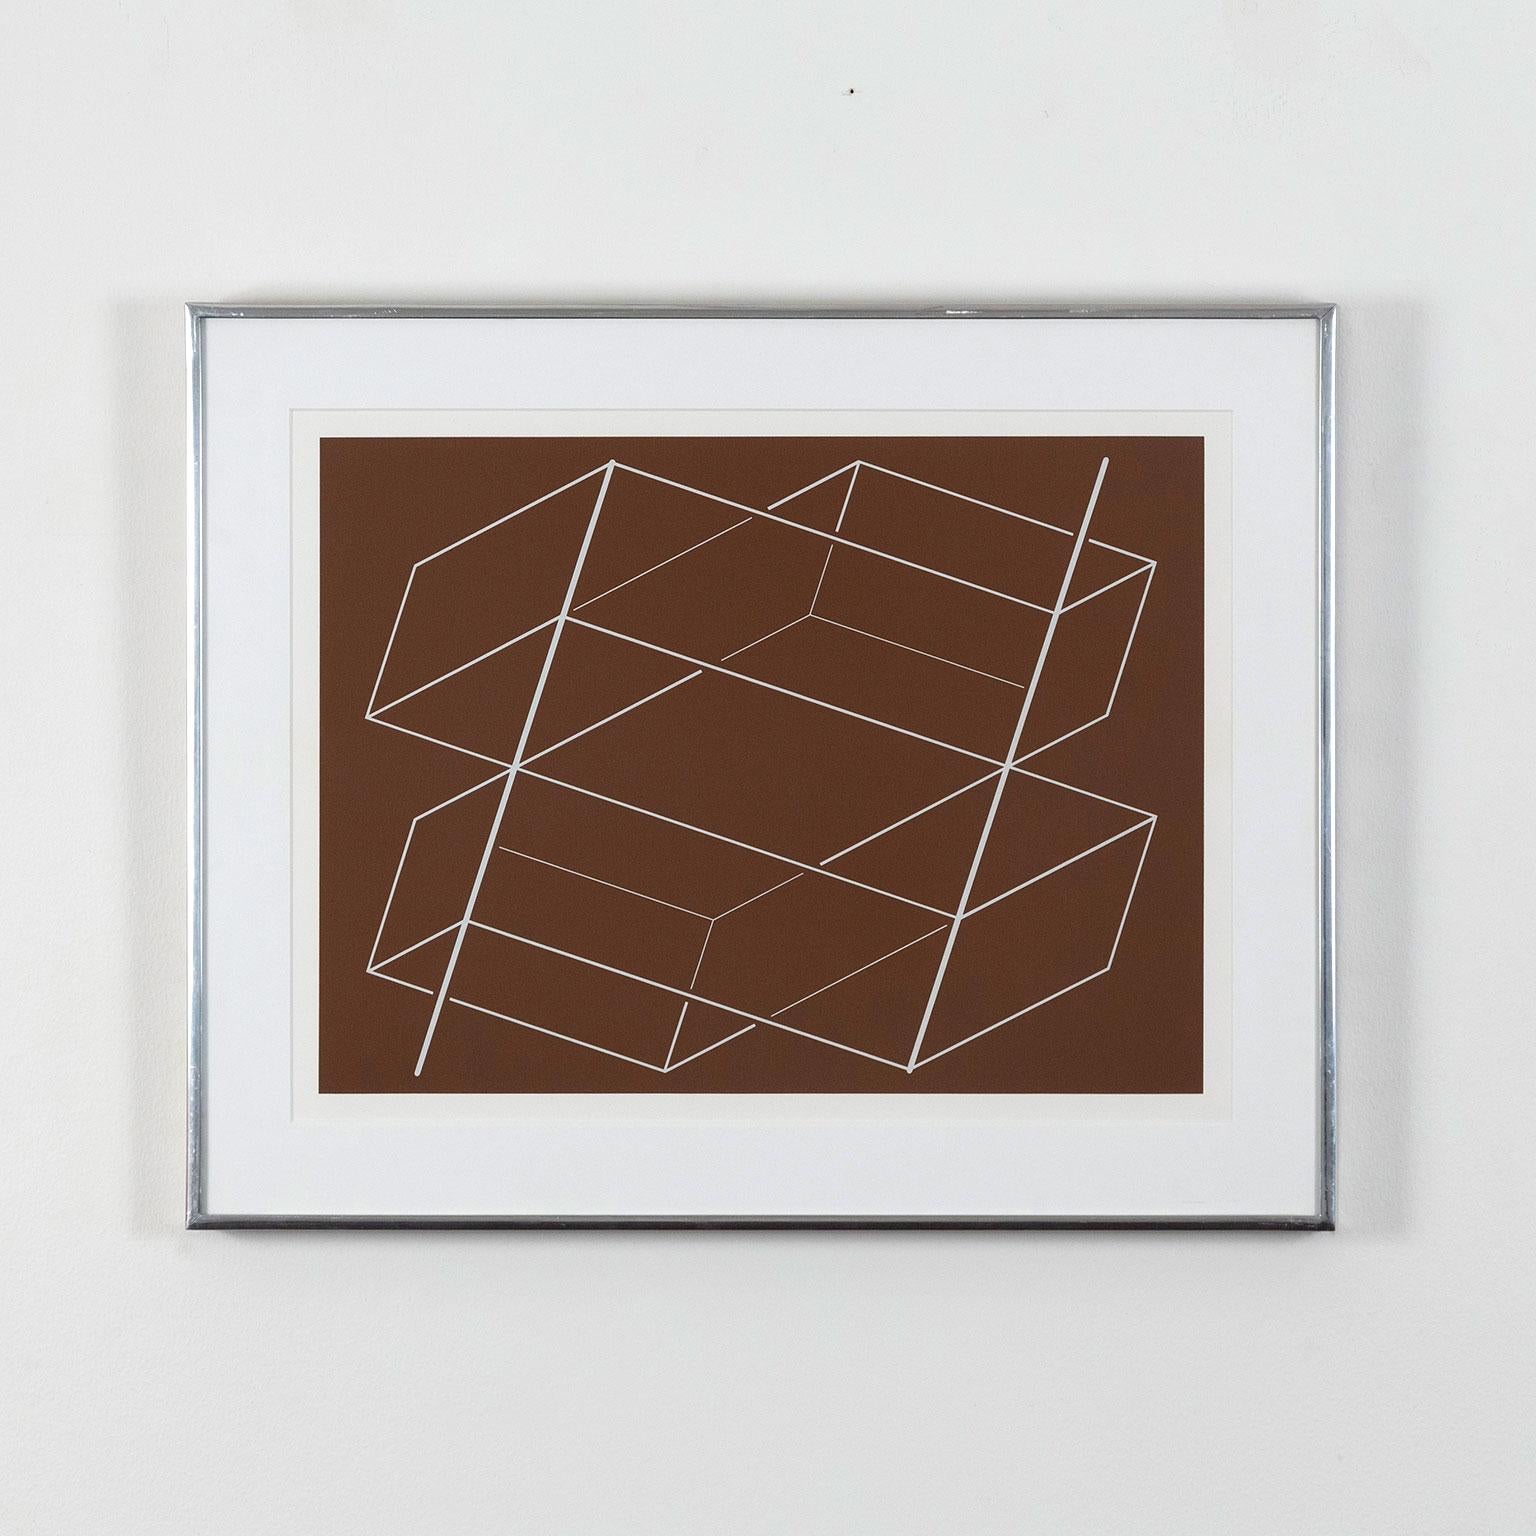 Bands/Posts - P1, F3, I2 - Print by Josef Albers